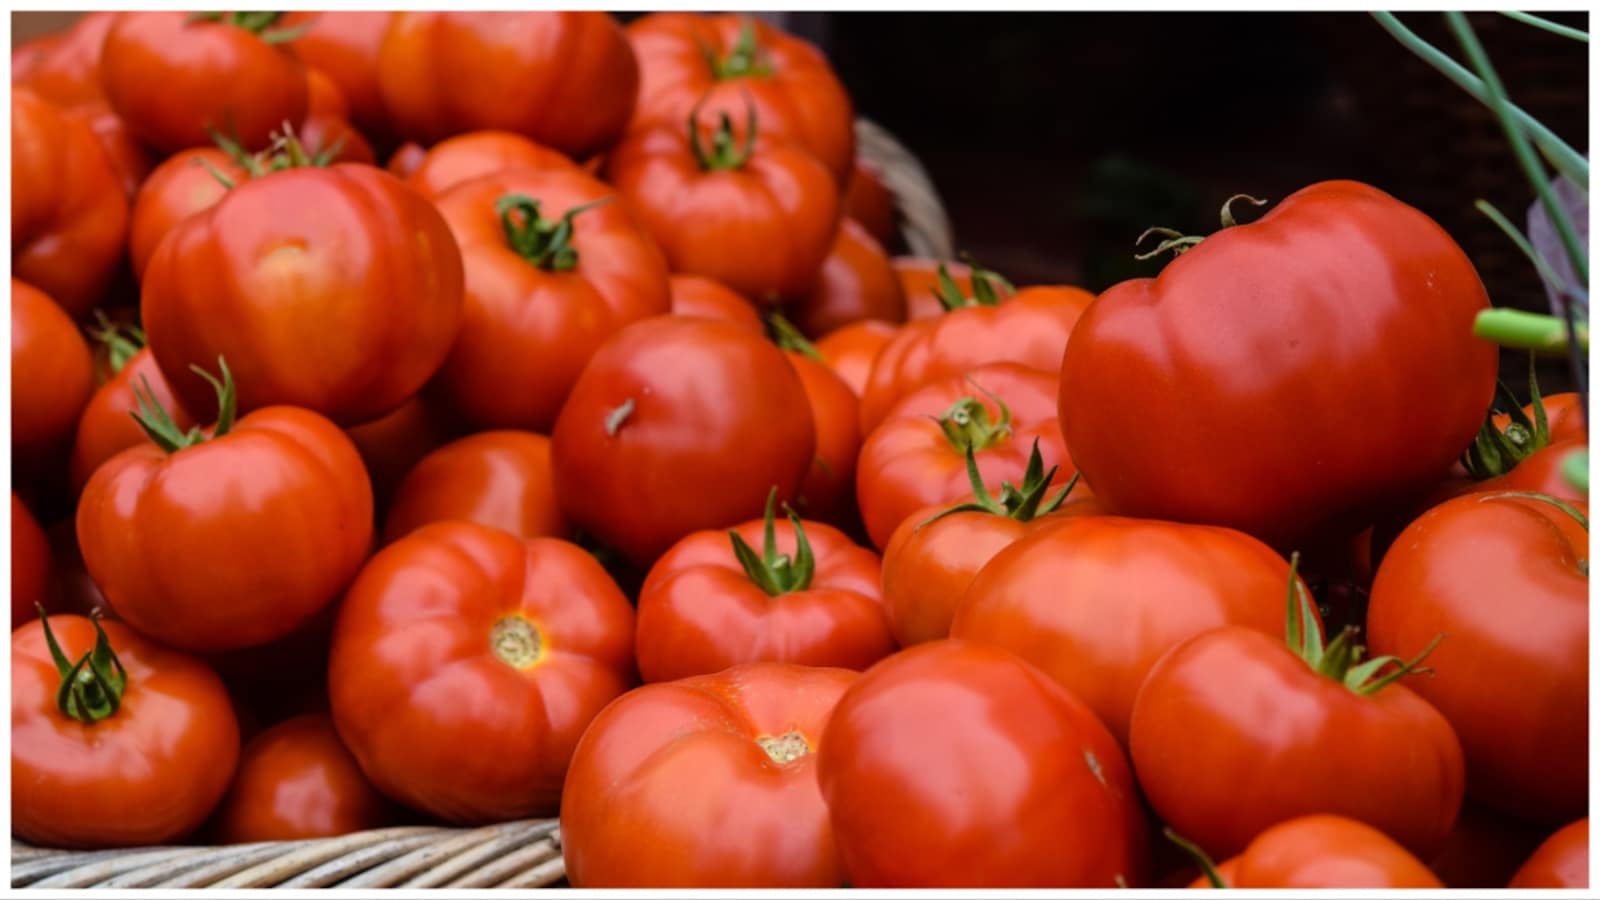 National Cooperative Consumer Federation Sells 560 Tonnes In 15 Days" Open Network for Digital Commerce Sells 10,000 Kg Tomatoes In 1 Week.